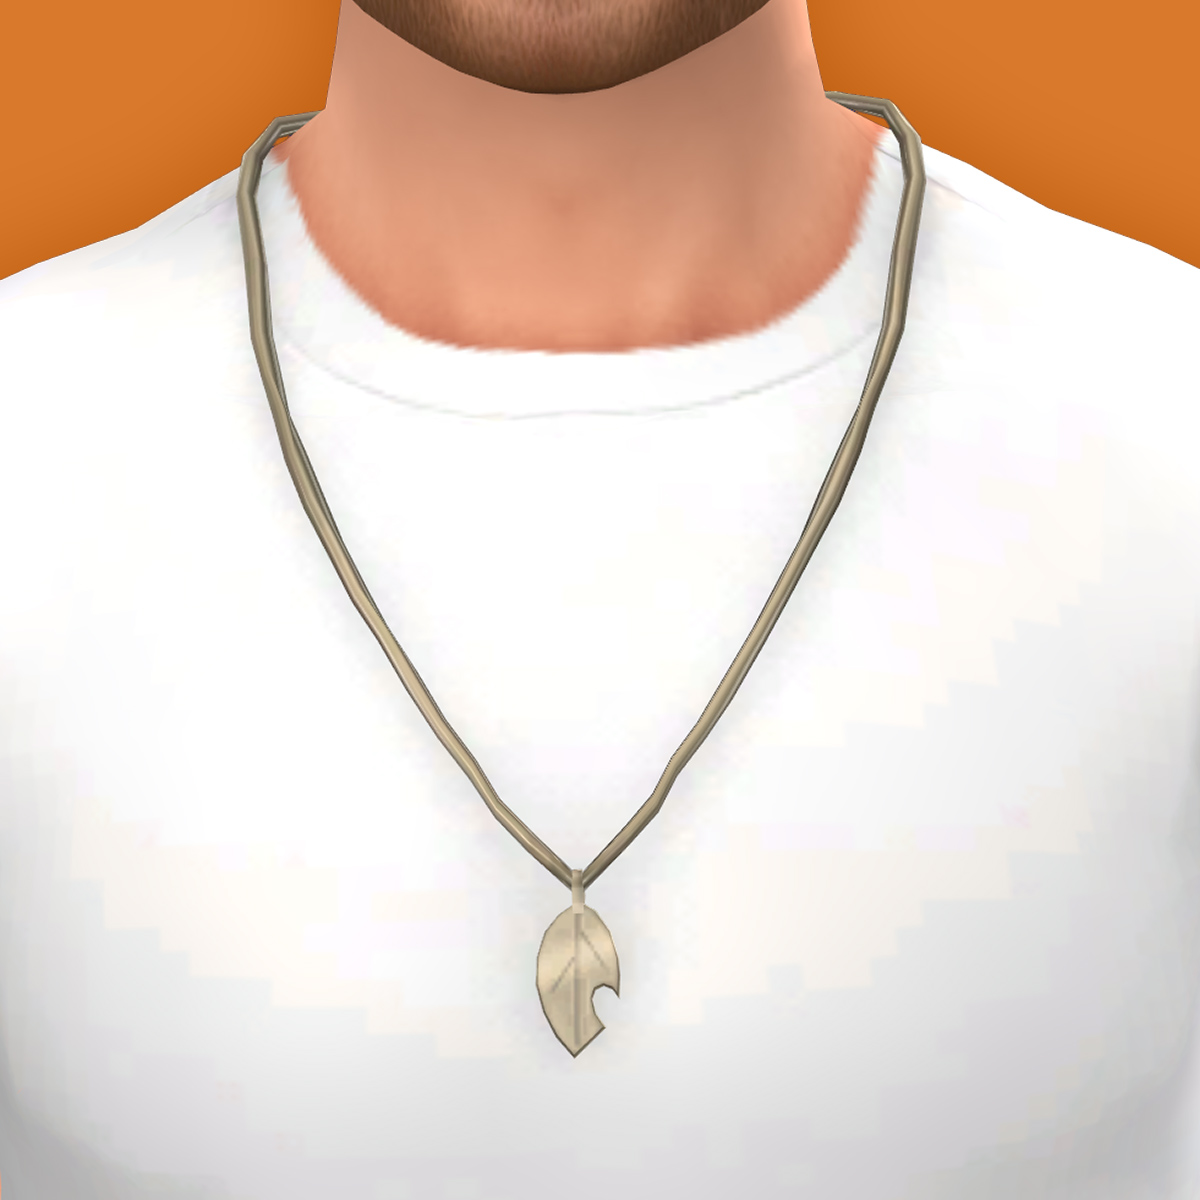 QICC - Leaf Necklace project avatar